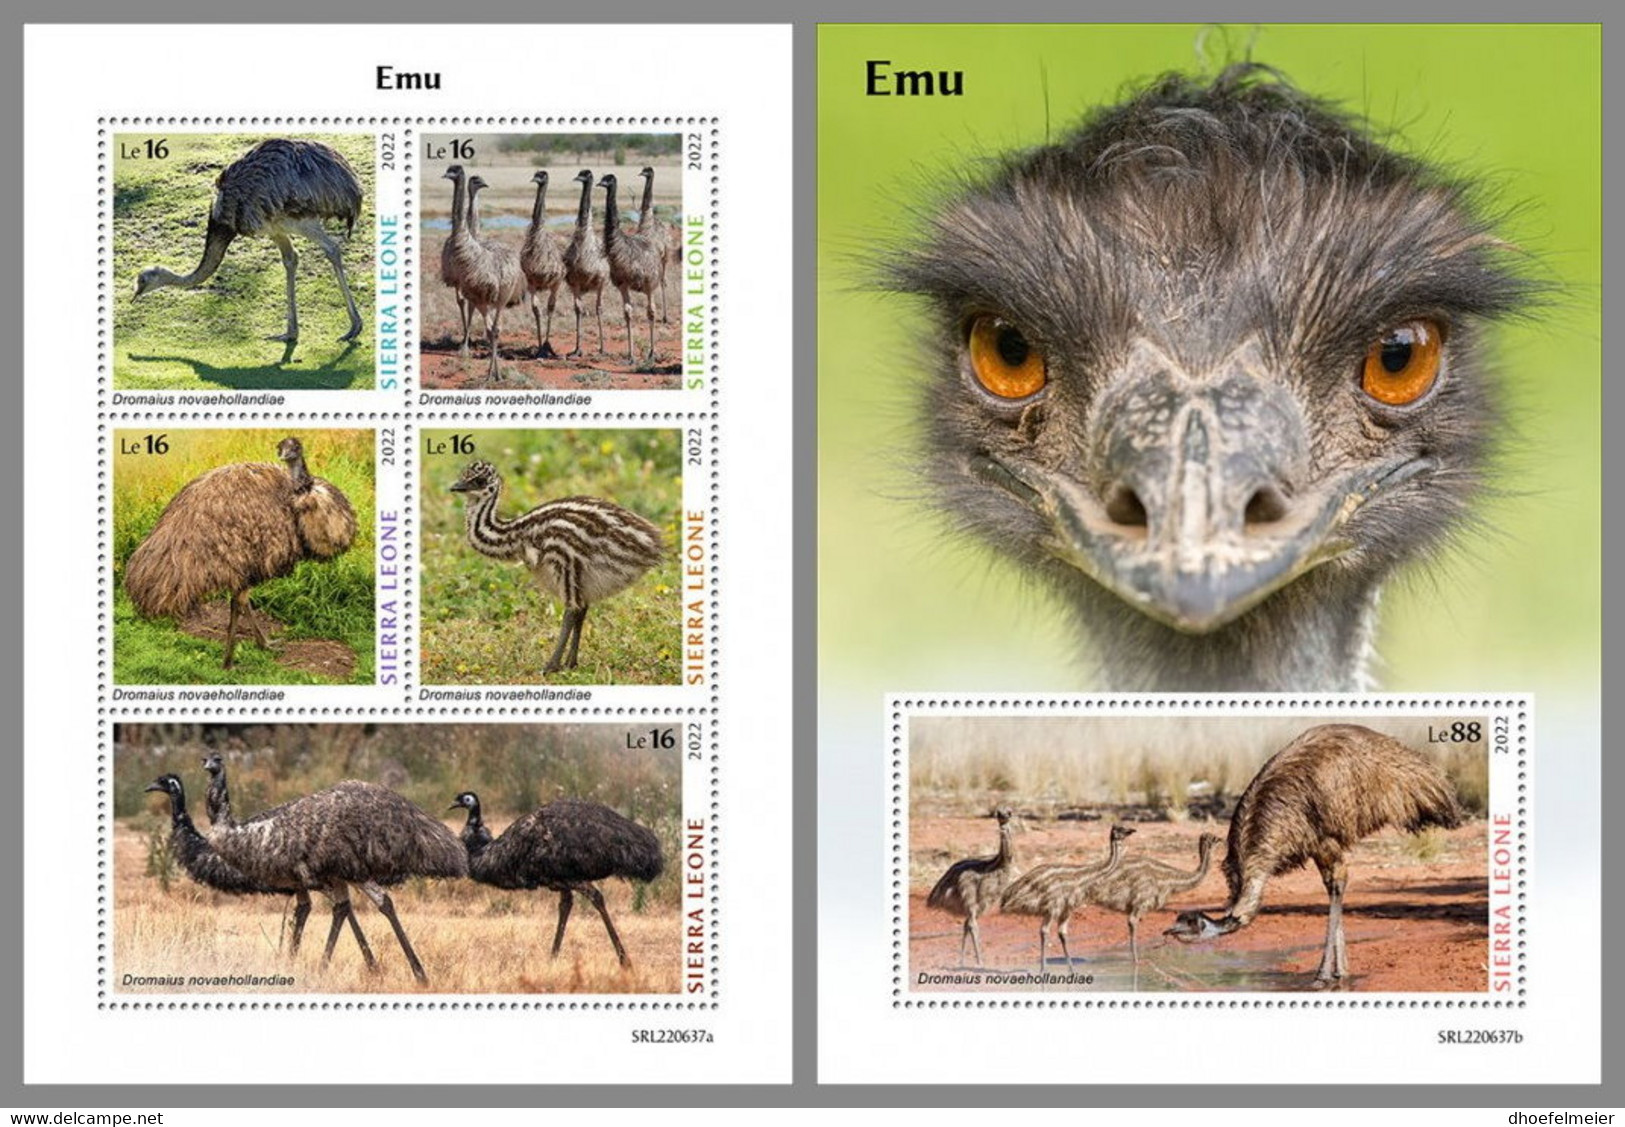 SIERRA LEONE 2022 MNH Emu Emeu M/S+S/S - OFFICIAL ISSUE - DHQ2310 - Avestruces